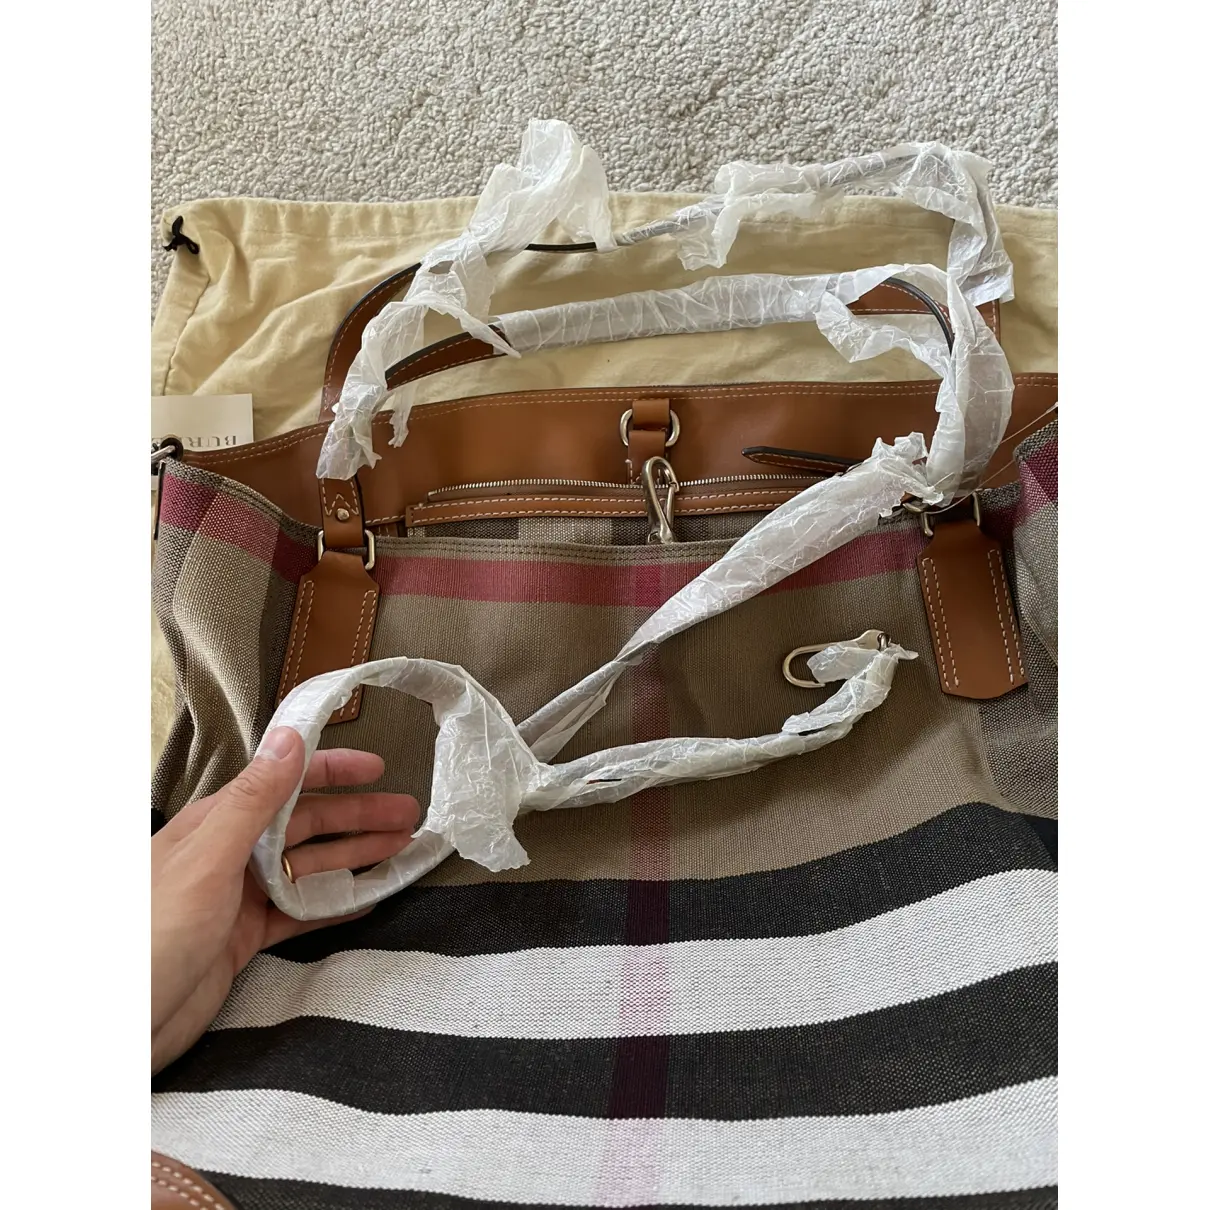 Leather 24h bag Burberry